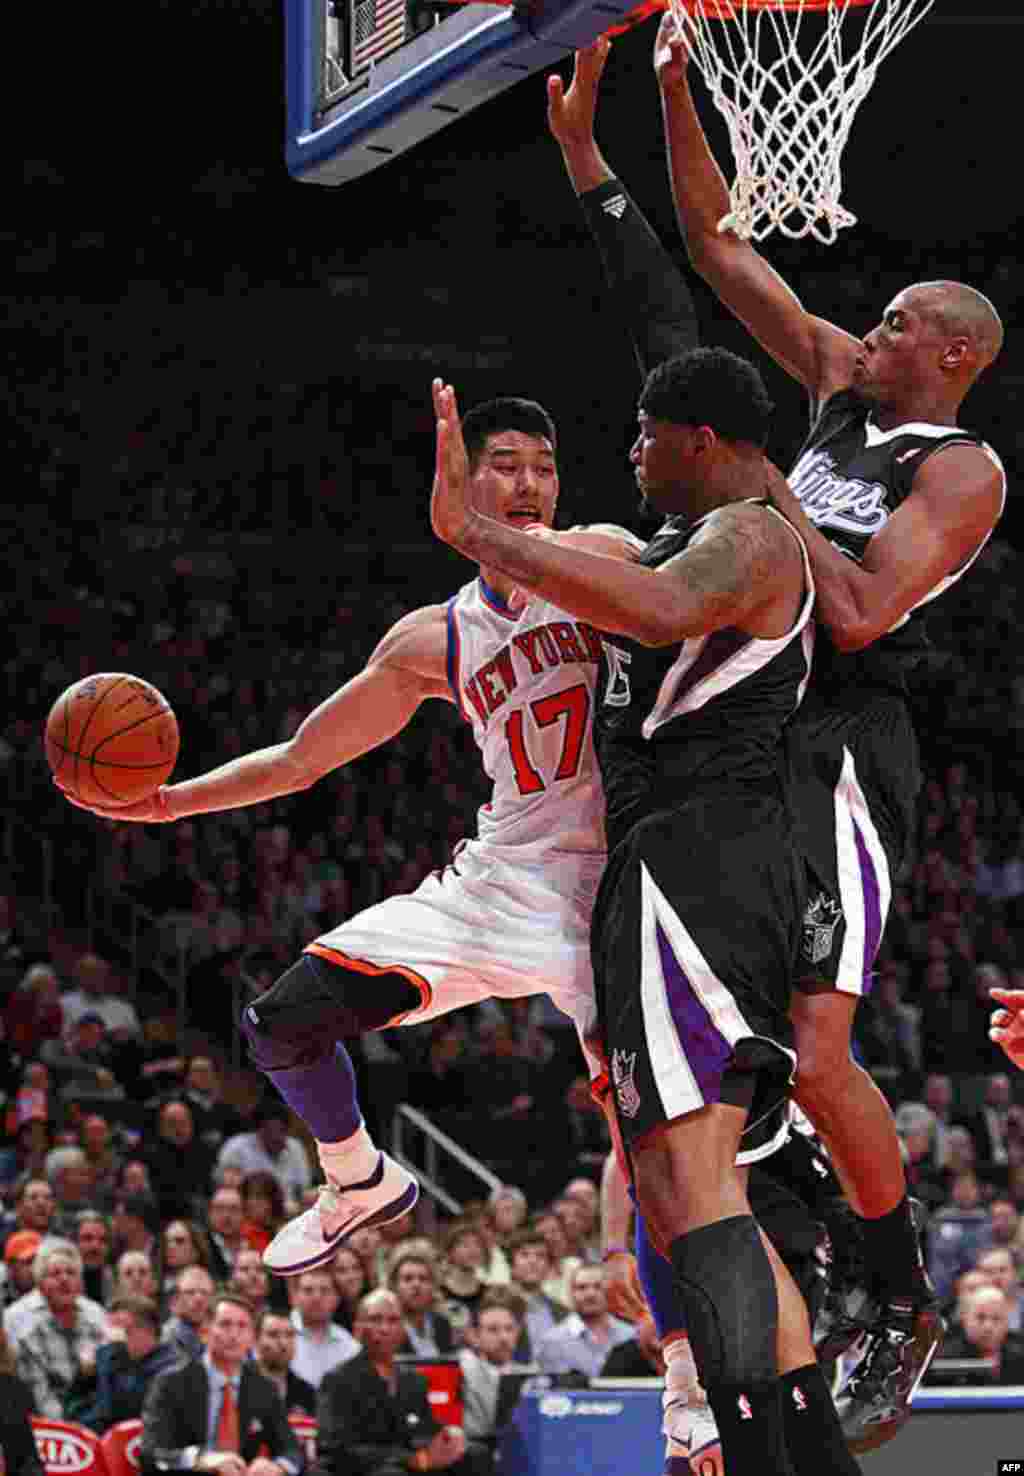 New York Knicks' Jeremy Lin passes away from Sacramento Kings' DeMarcus Cousins, center, and Travis Outlaw, right, during the first half of an NBA basketball game, February 15, 2012, in New York. (AP)